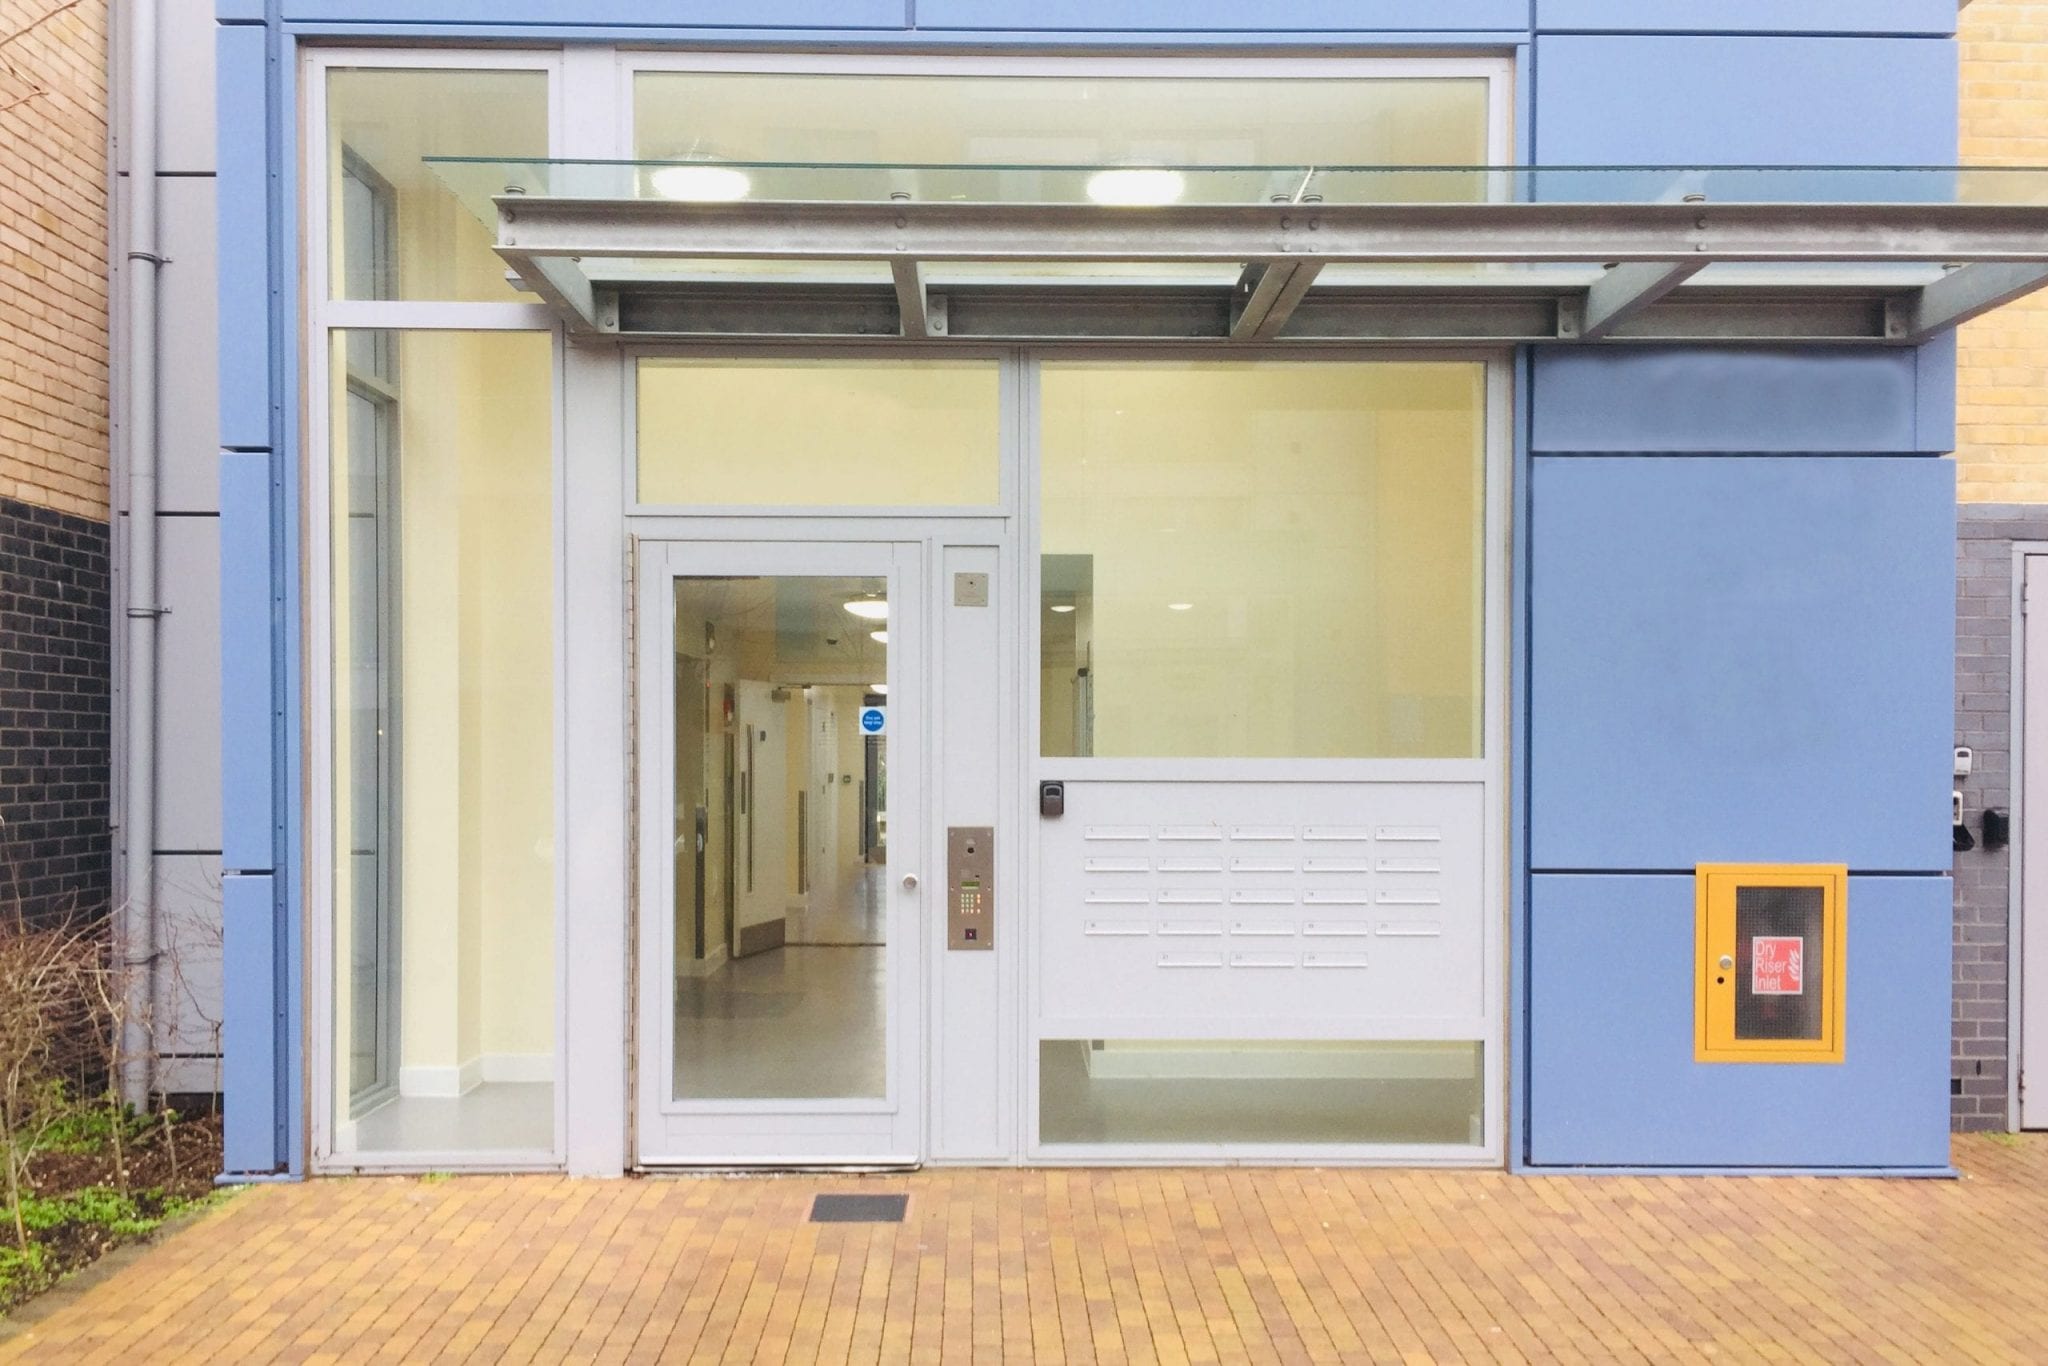 Fully Glazed Warrior Communal Entrance Door & Screens on a Communal Residential Building